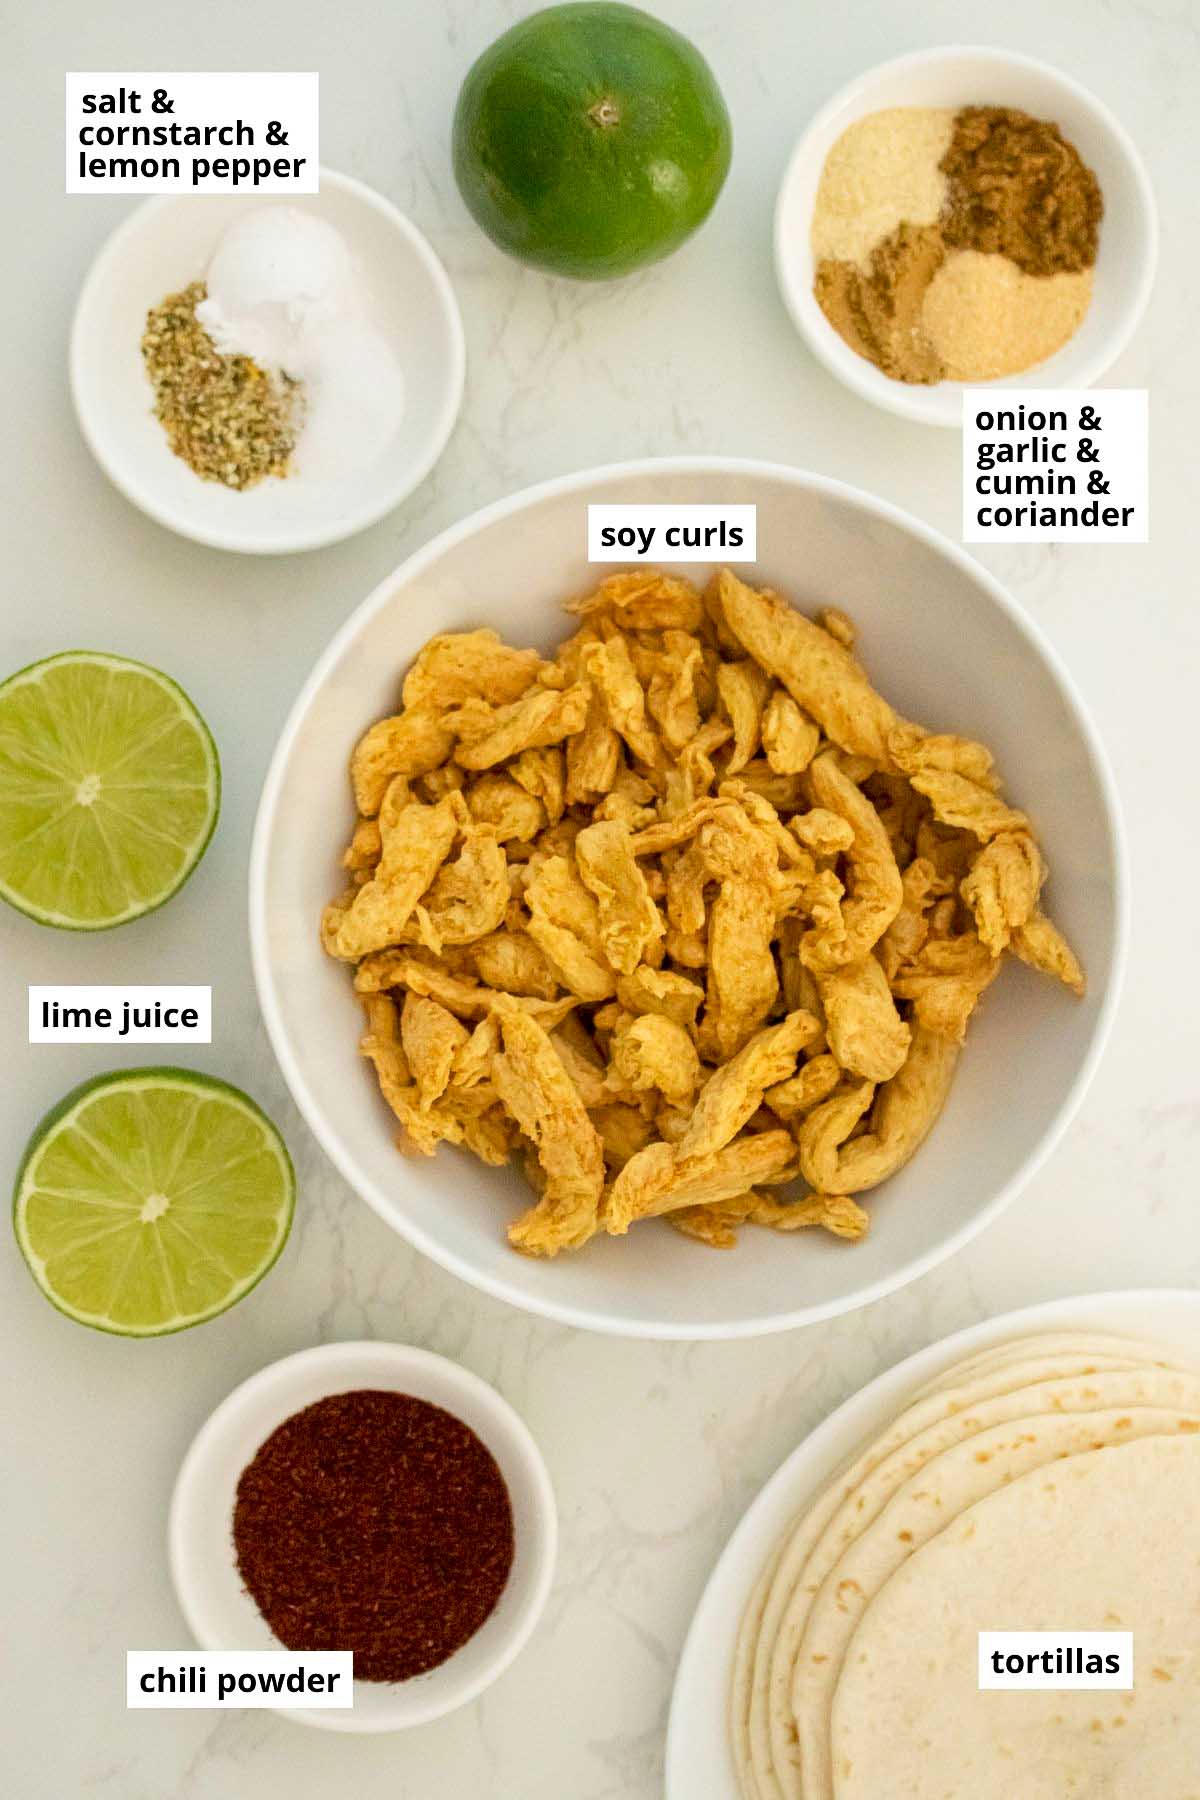 soy curls, tortillas, limes, and spices in bowls on a white table